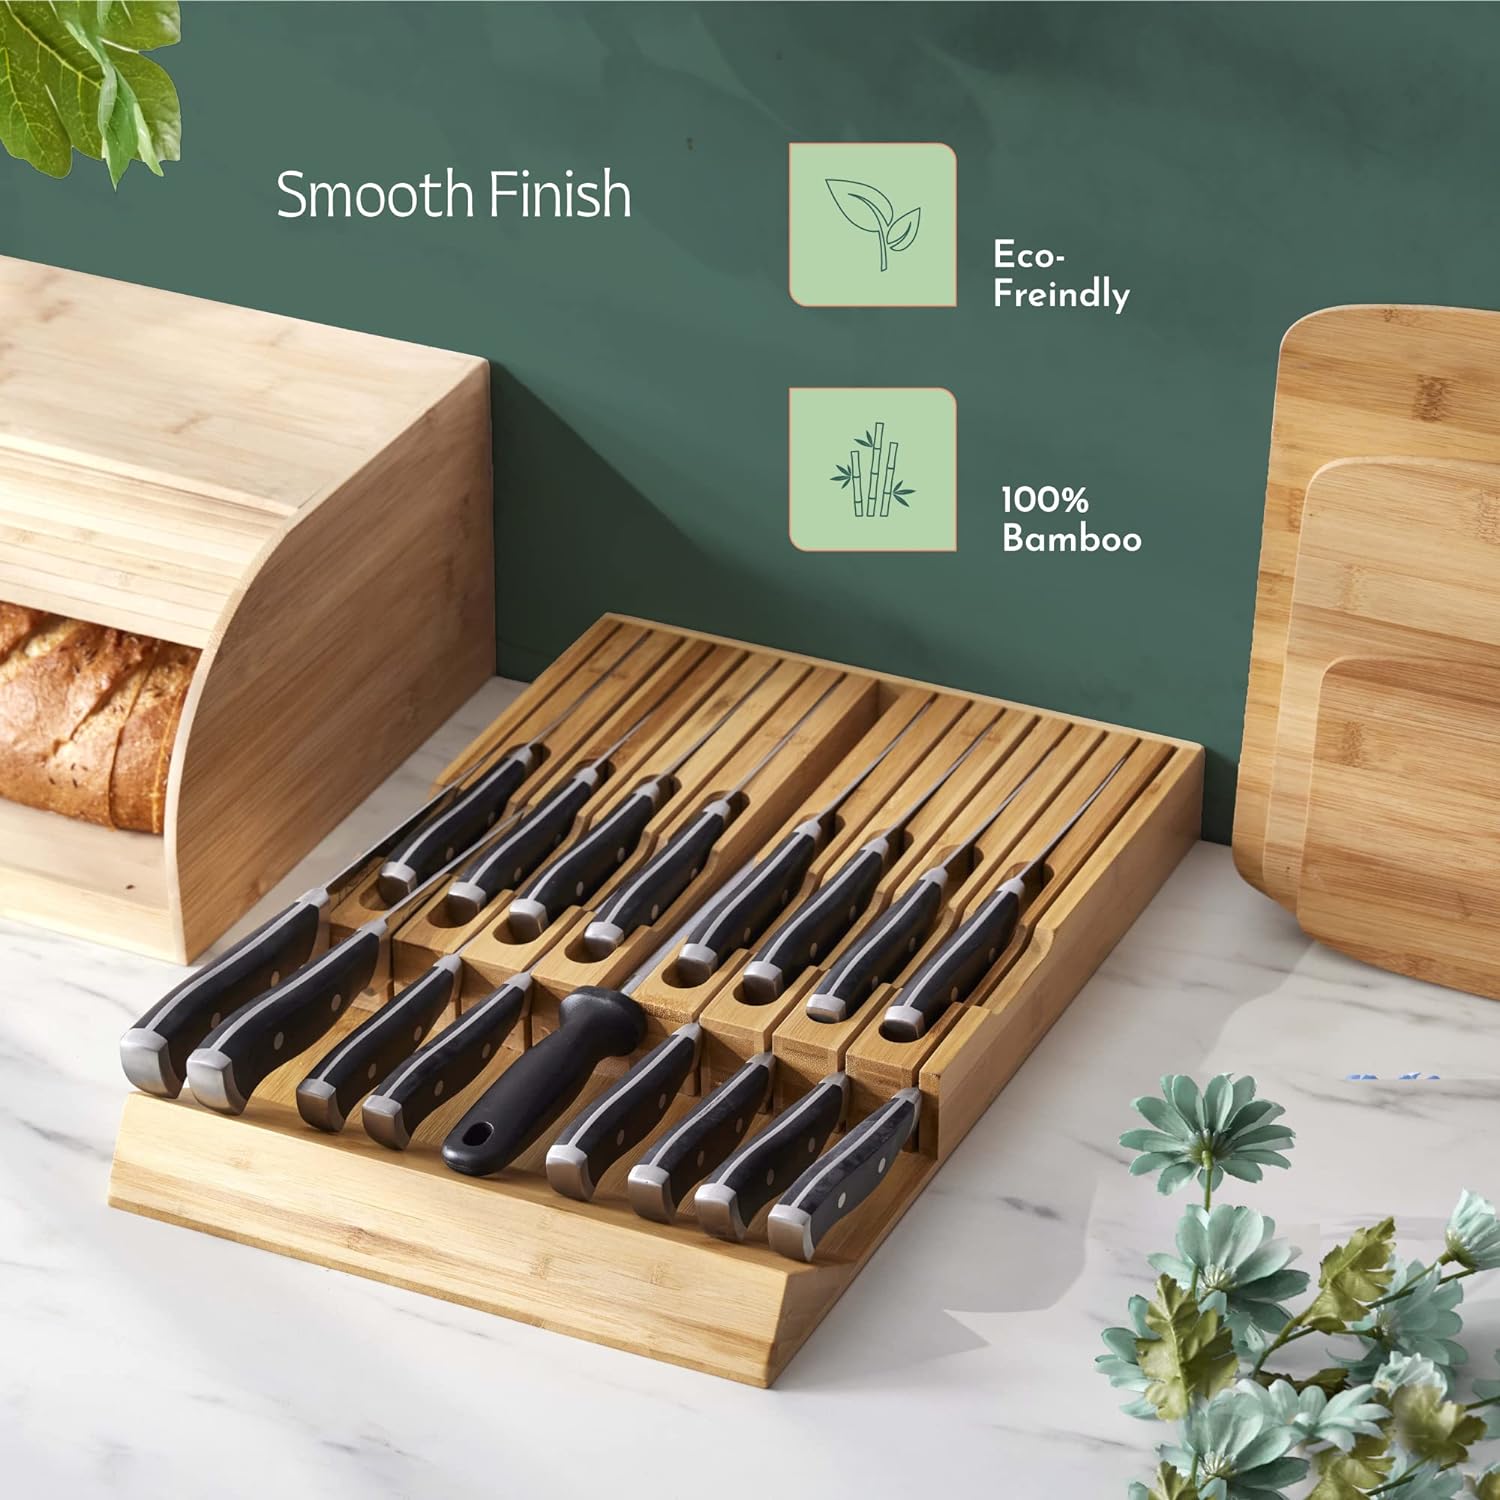 High-Grade 100% Bamboo Knife Drawer Organizer - 16 Knife Slots Plus a Sharpener Slot, Knife Organizer for Kitchen Organization, Durable, Secured, Practical, Eco-Friendly, Knife Block without Knives. 1.9"-15"-15"